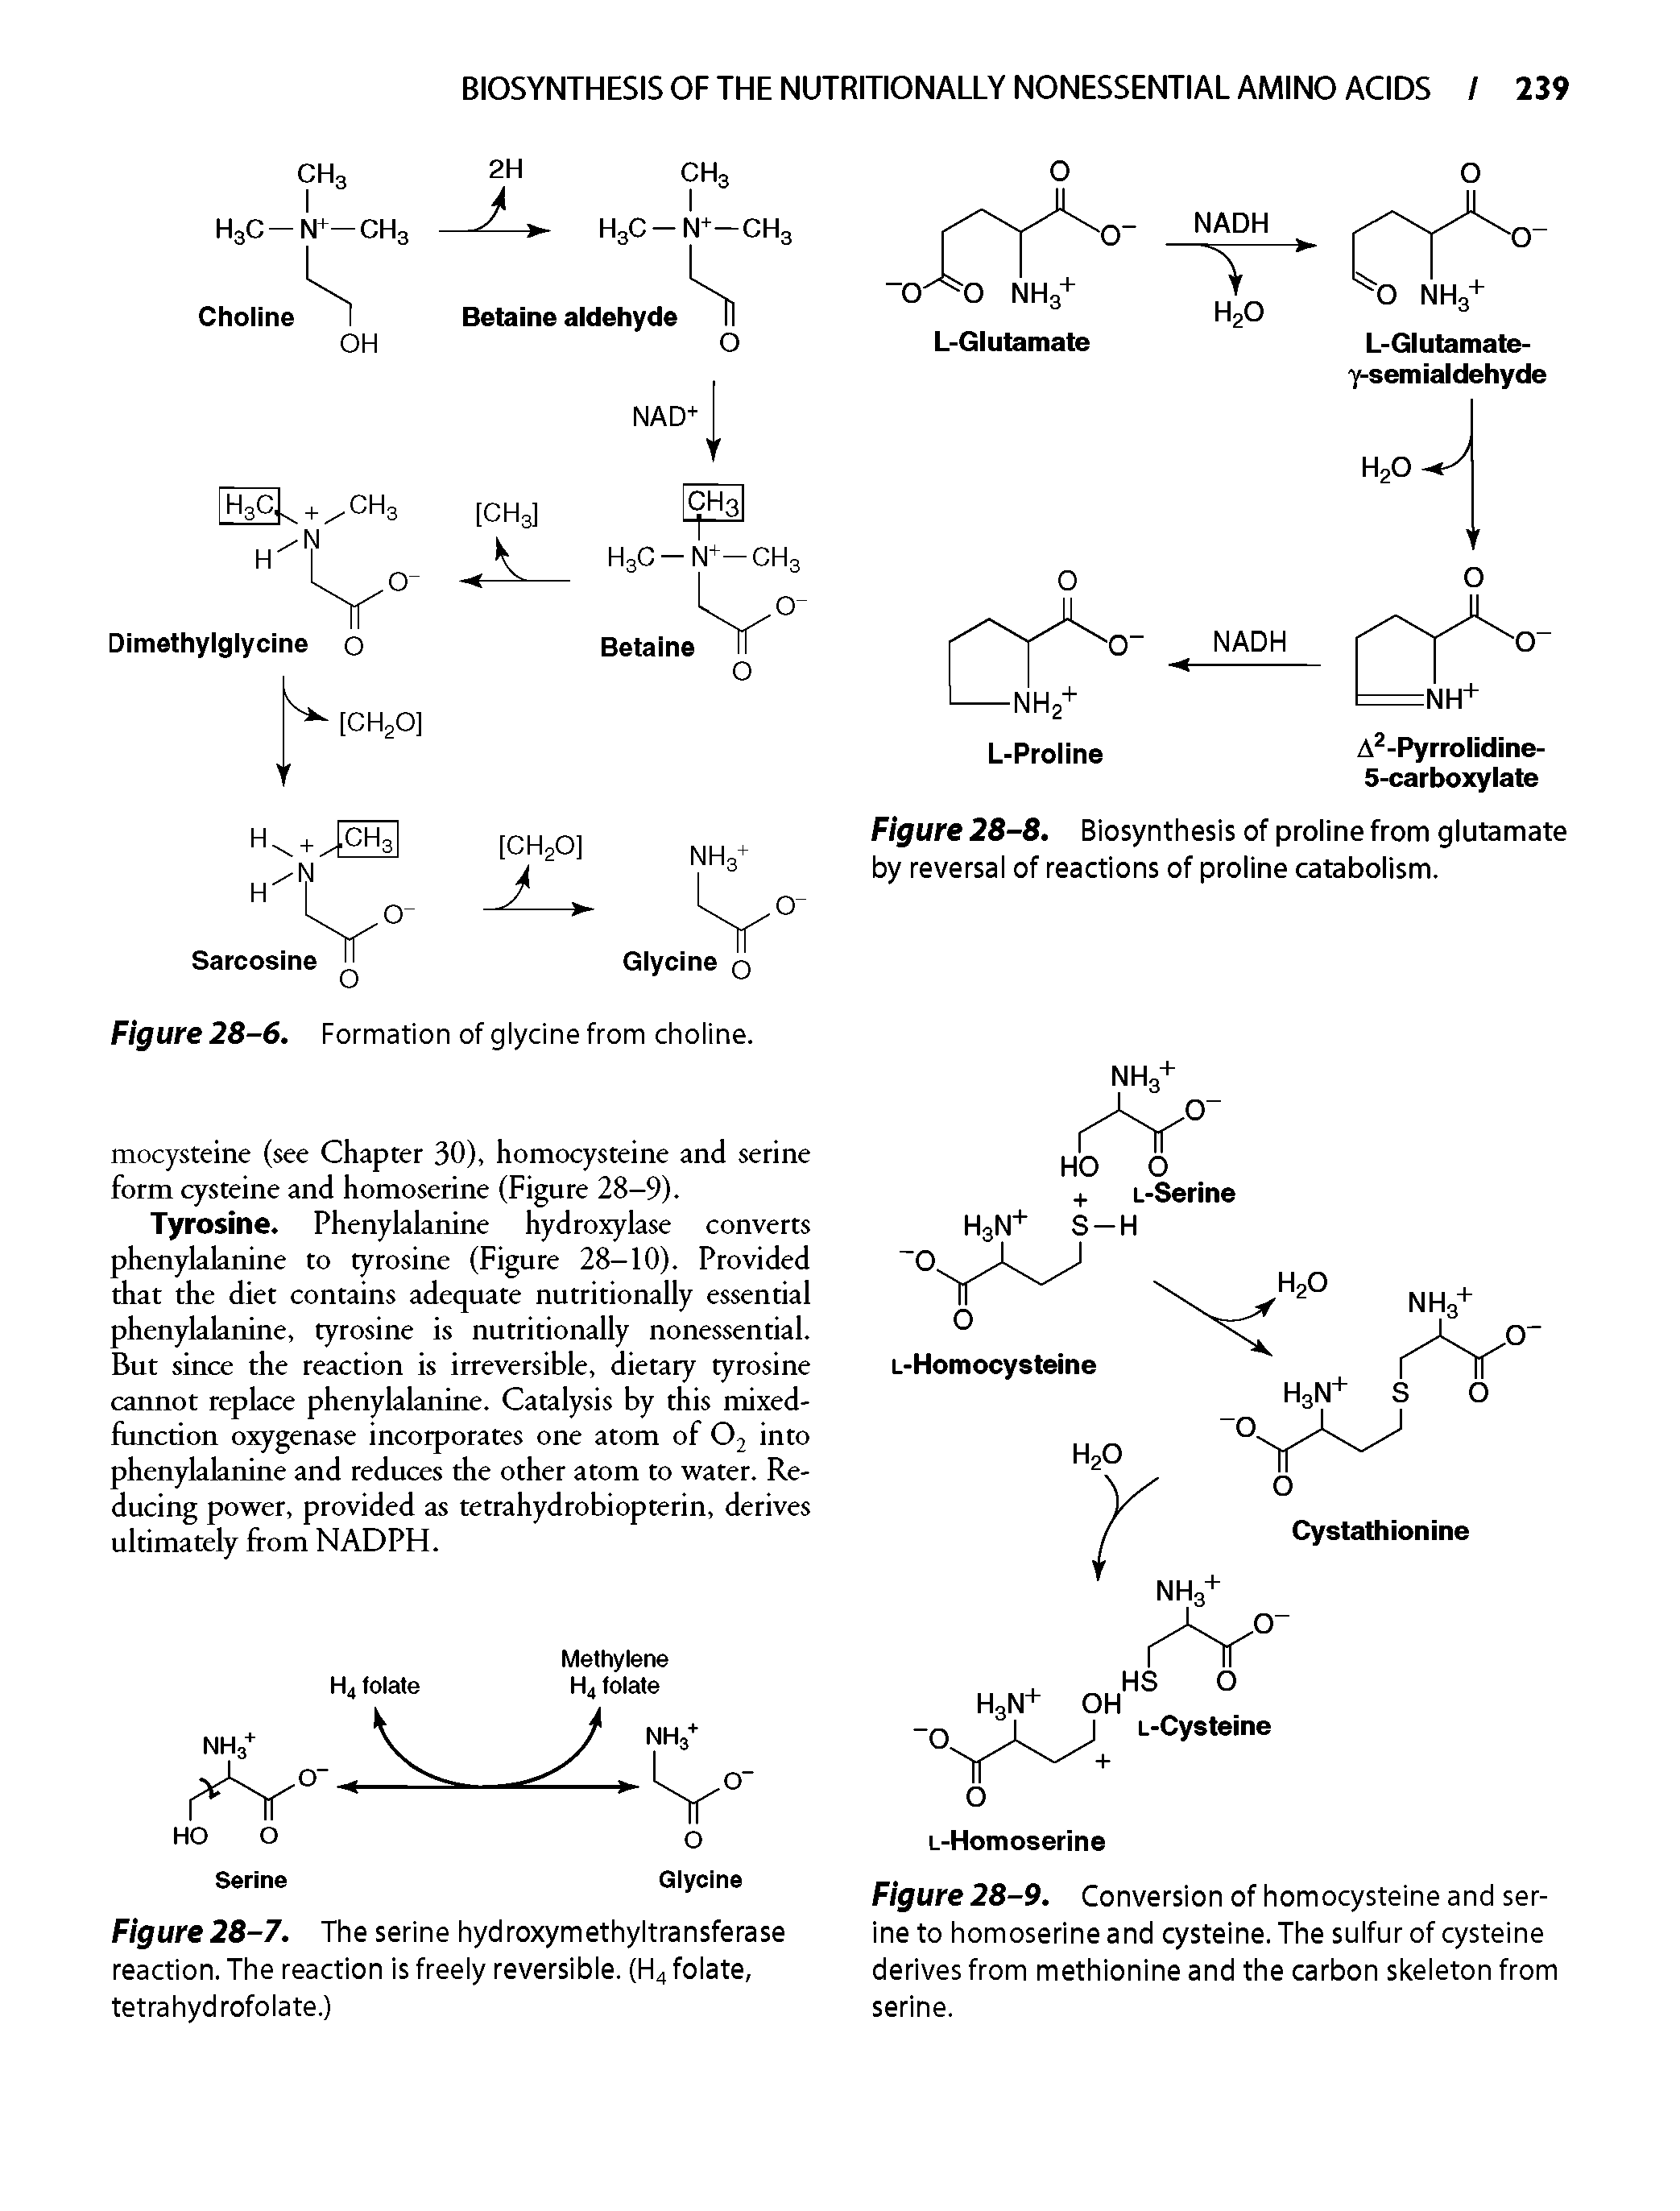 Figure28-7. The serine hydroxymethyltransferase reaction. The reaction is freely reversible. (H4 folate, tetrahyd rofolate.)...